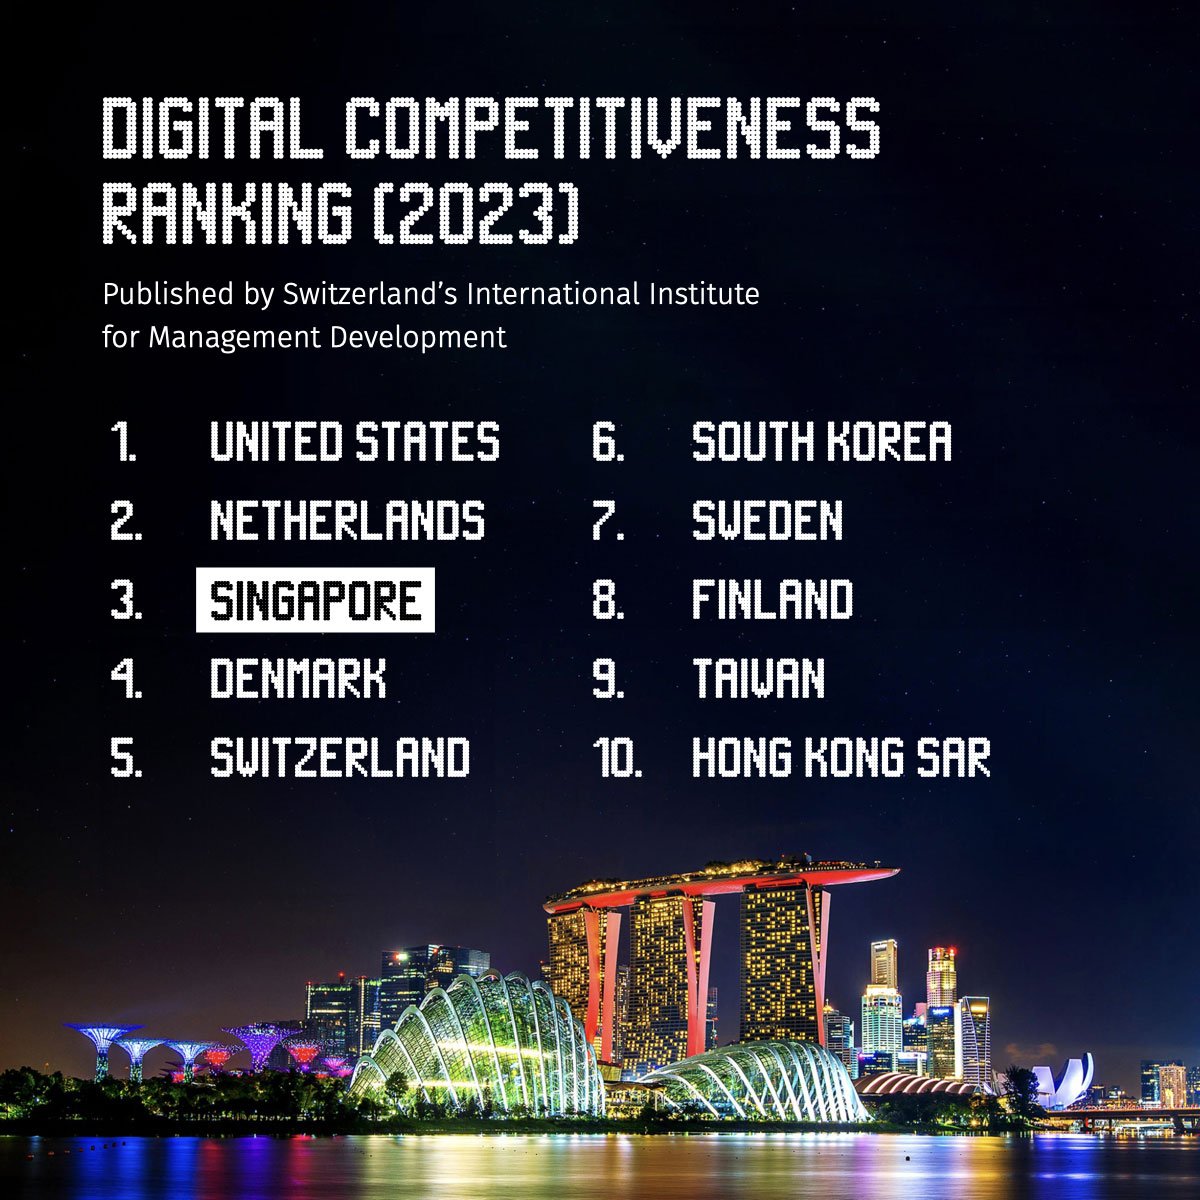 IMD Digital Competitiveness Ranking 2023 (Singapore is placed 3rd in the ranking)